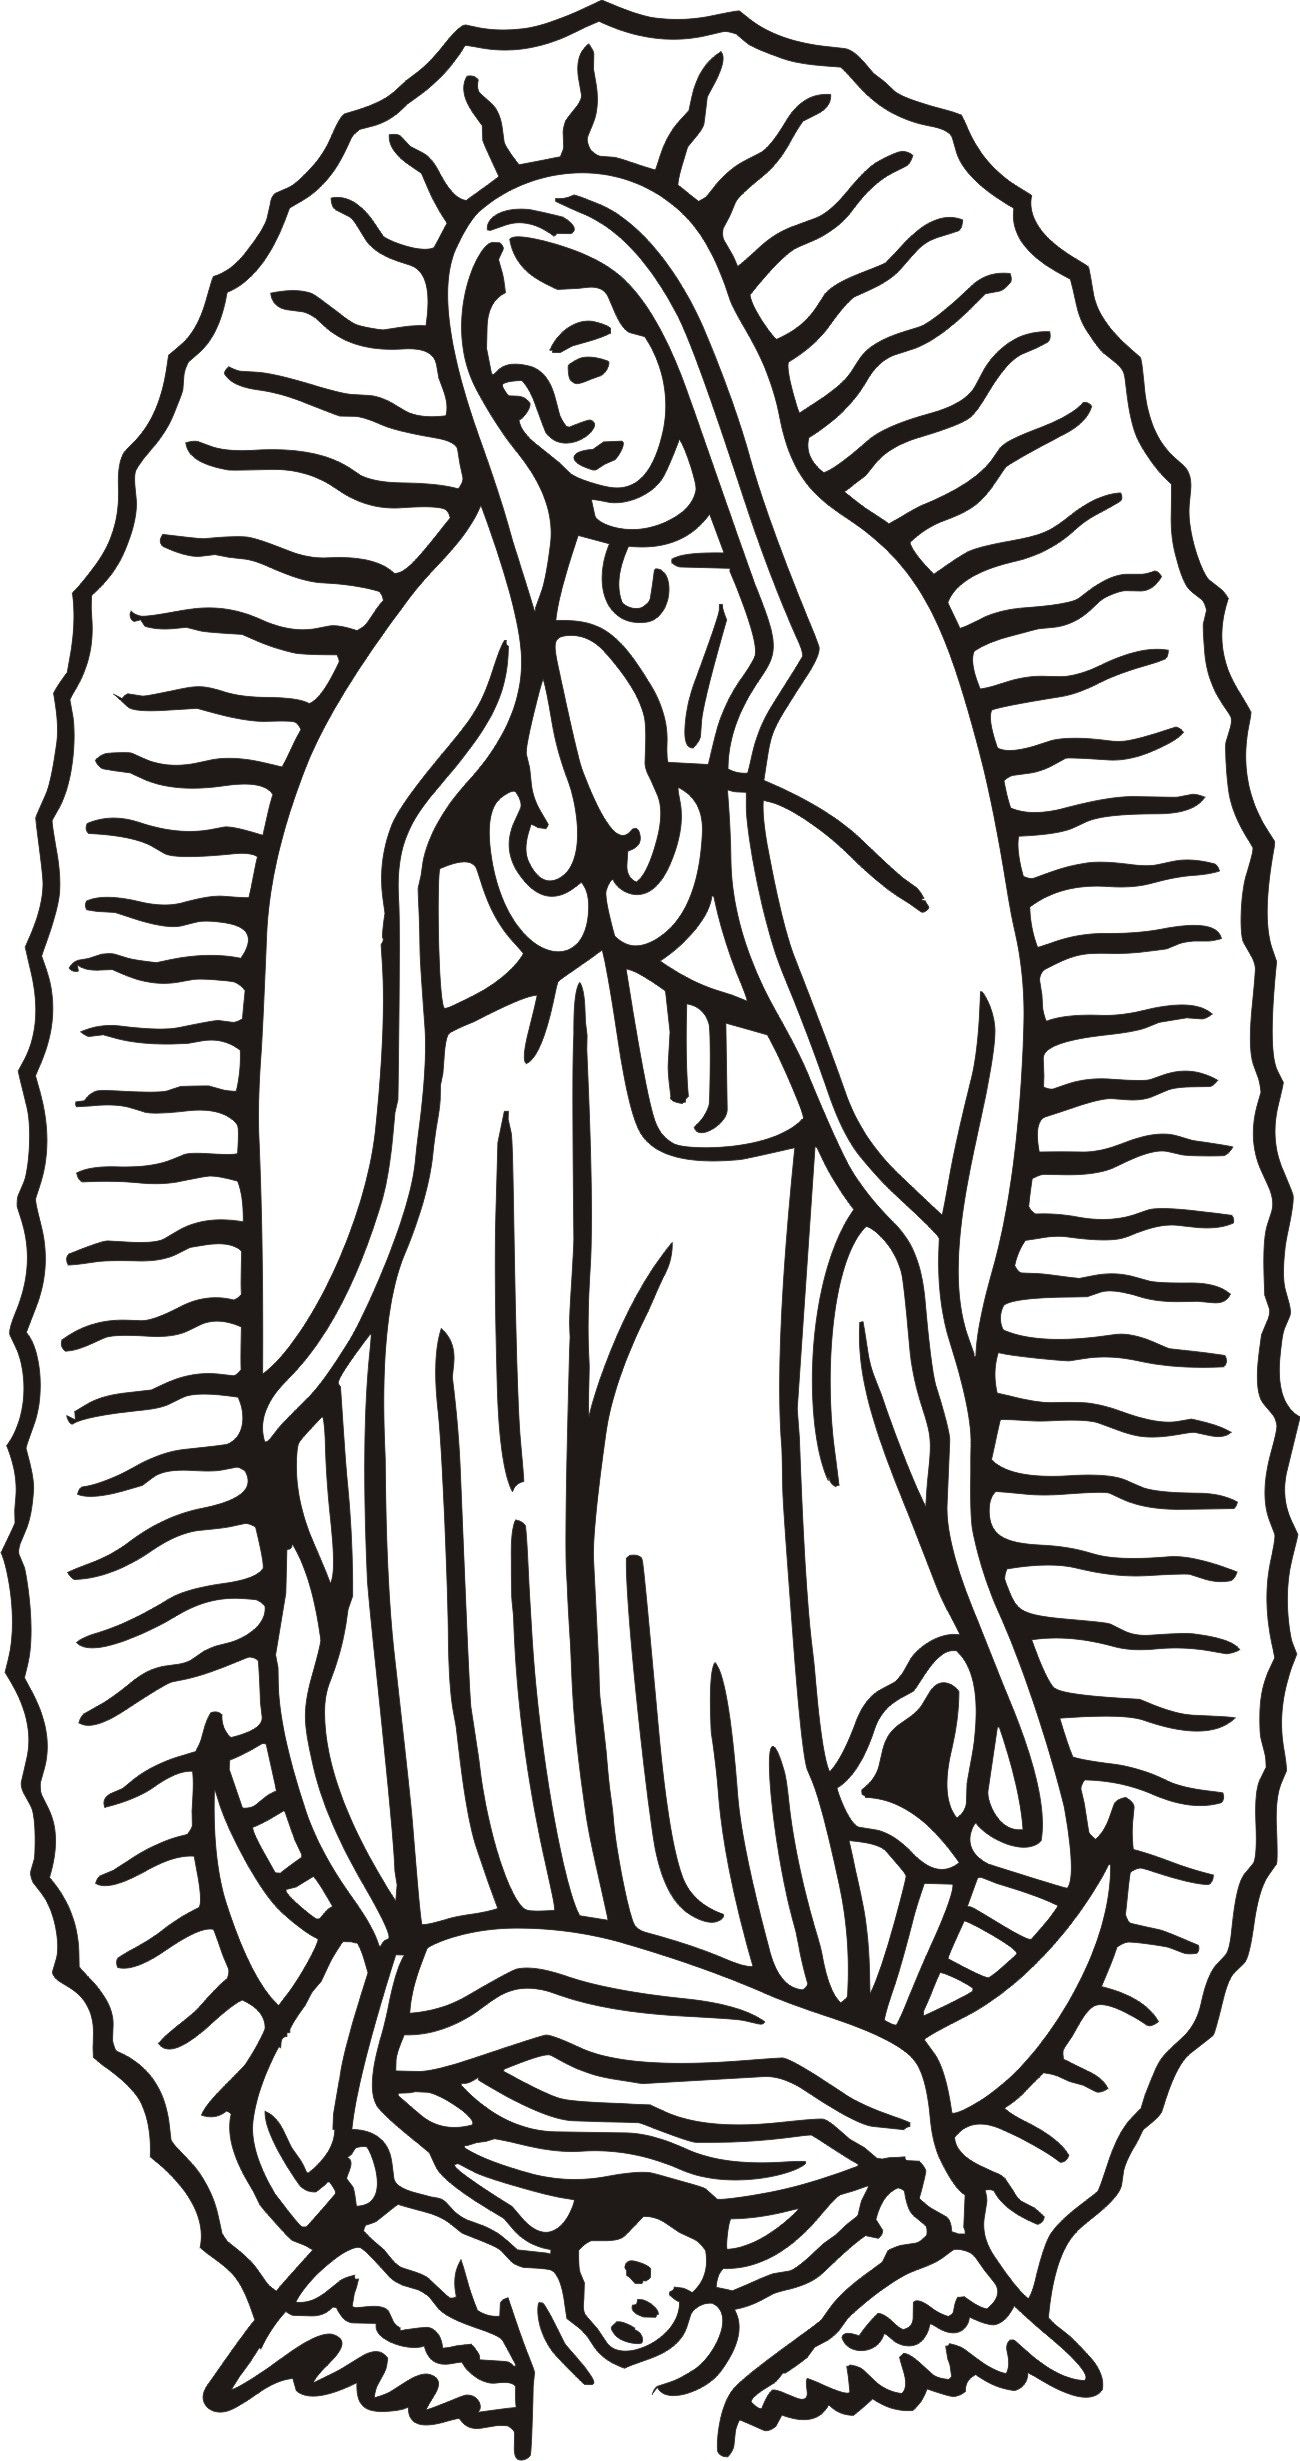 La Virgen De Guadalupe - Coloring Pages for Kids and for Adults